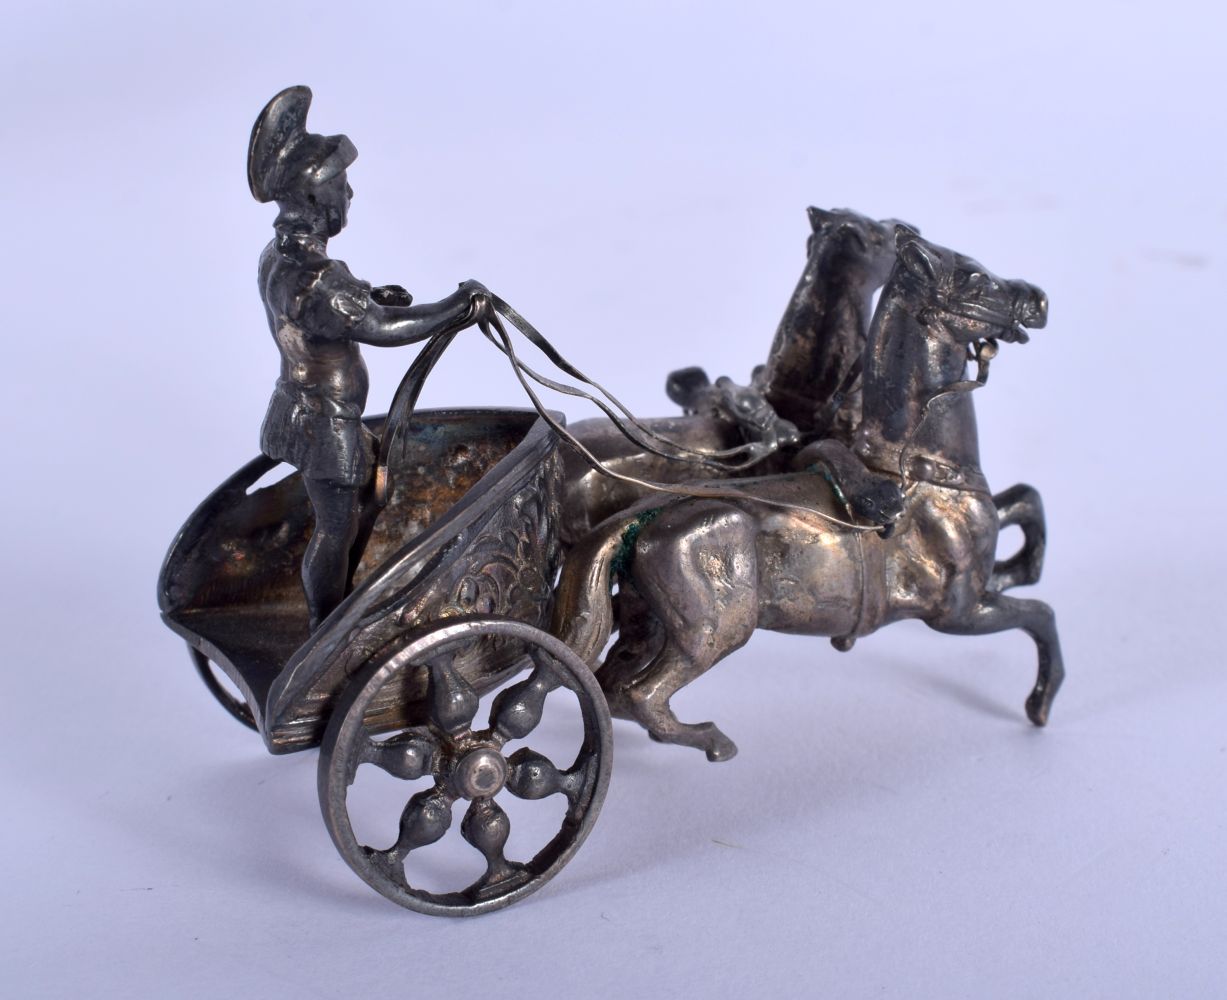 AN ANTIQUE SILVER CHARIOT. 64 grams. 6.5 cm x 5 cm. - Image 2 of 3